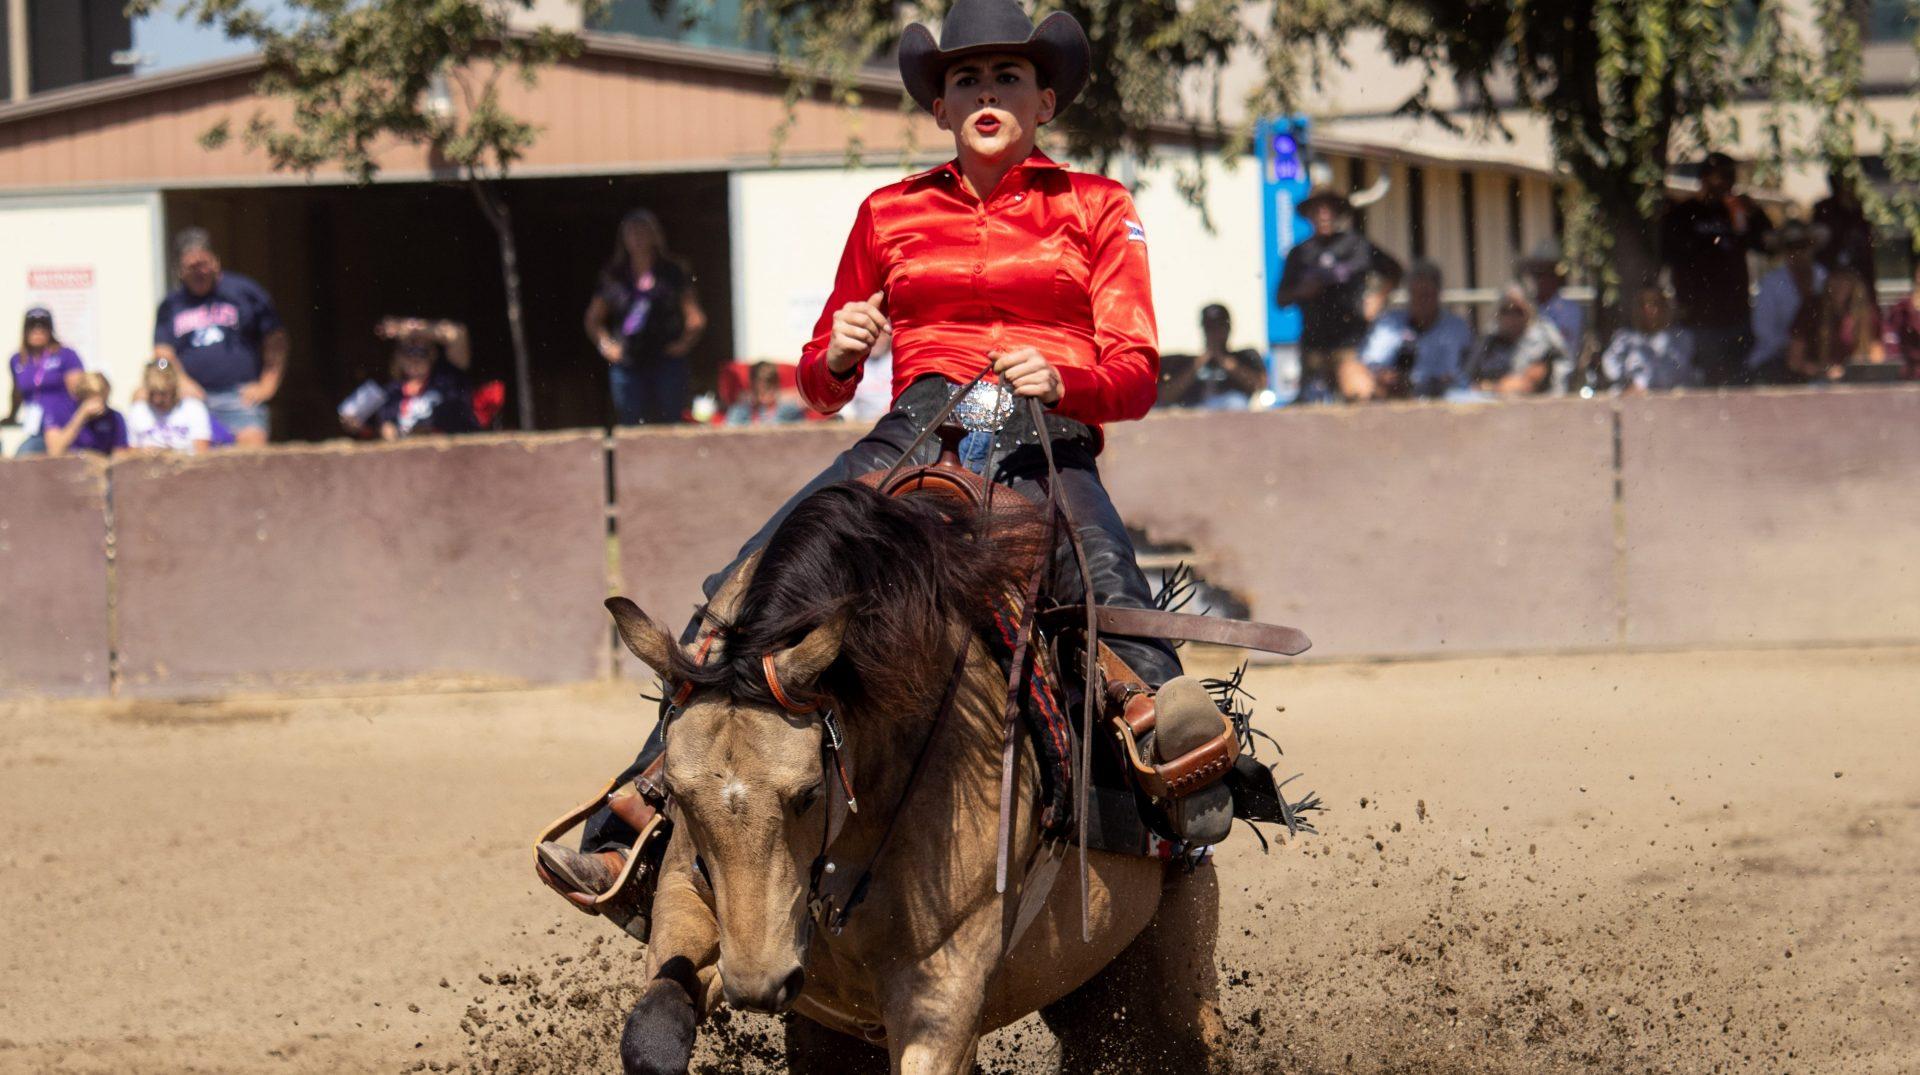 Fresno State equestrian team member Paige Barton at the Student Horse Center on Friday, Oct. 4, 2019. (Armando Carreno/The Collegian.)